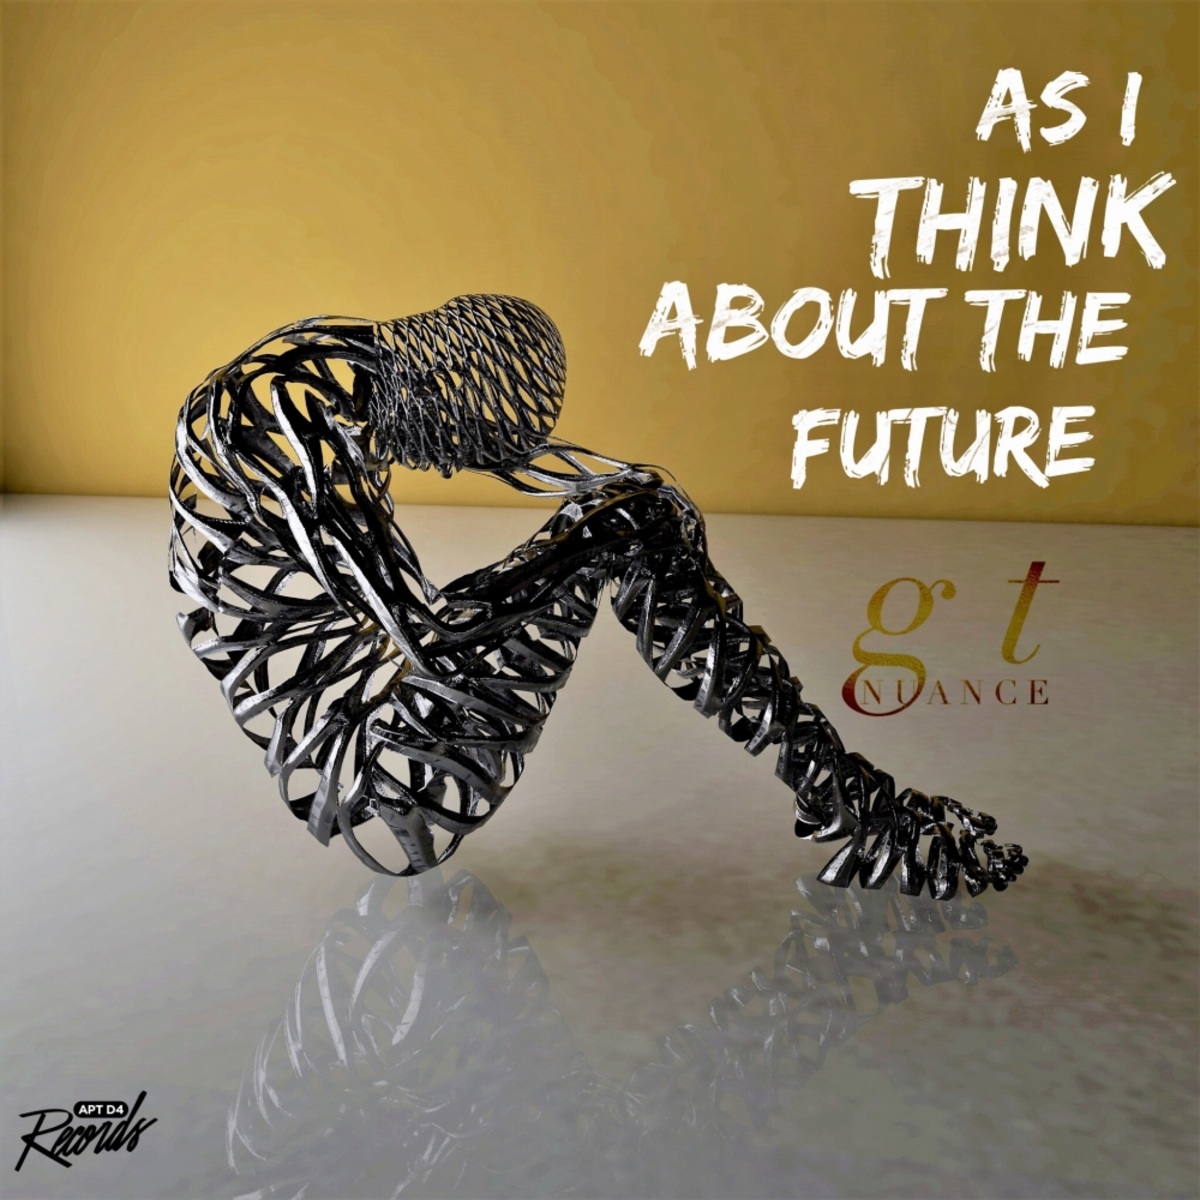 GT Nuance - As I Think About The Future / Apt D4 Records